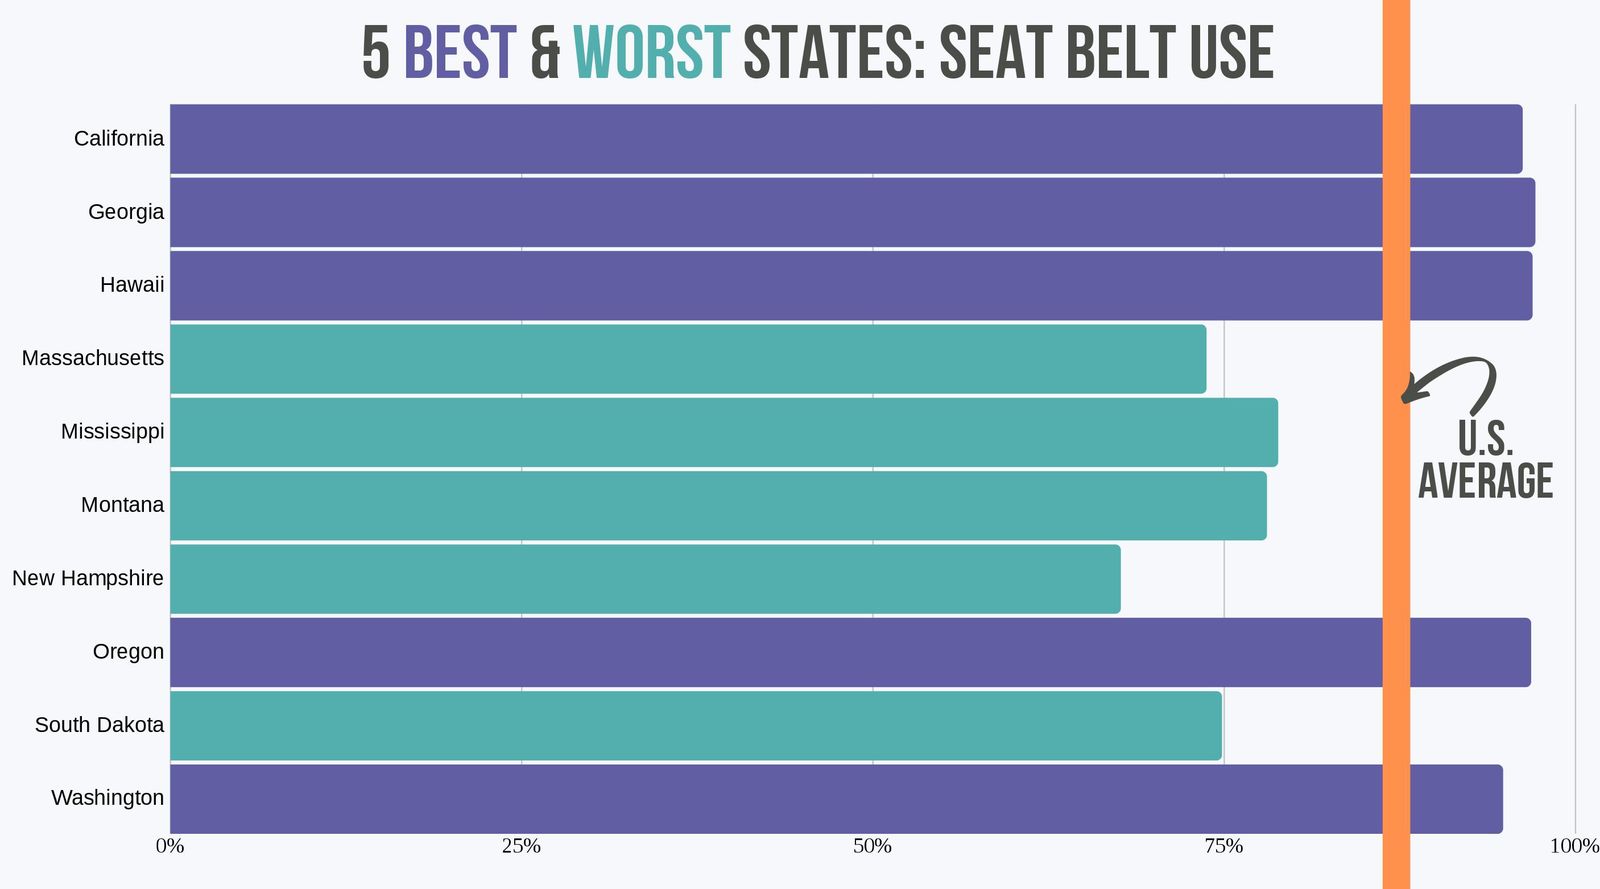 Seat Belt use in 5 best and worst states 2017